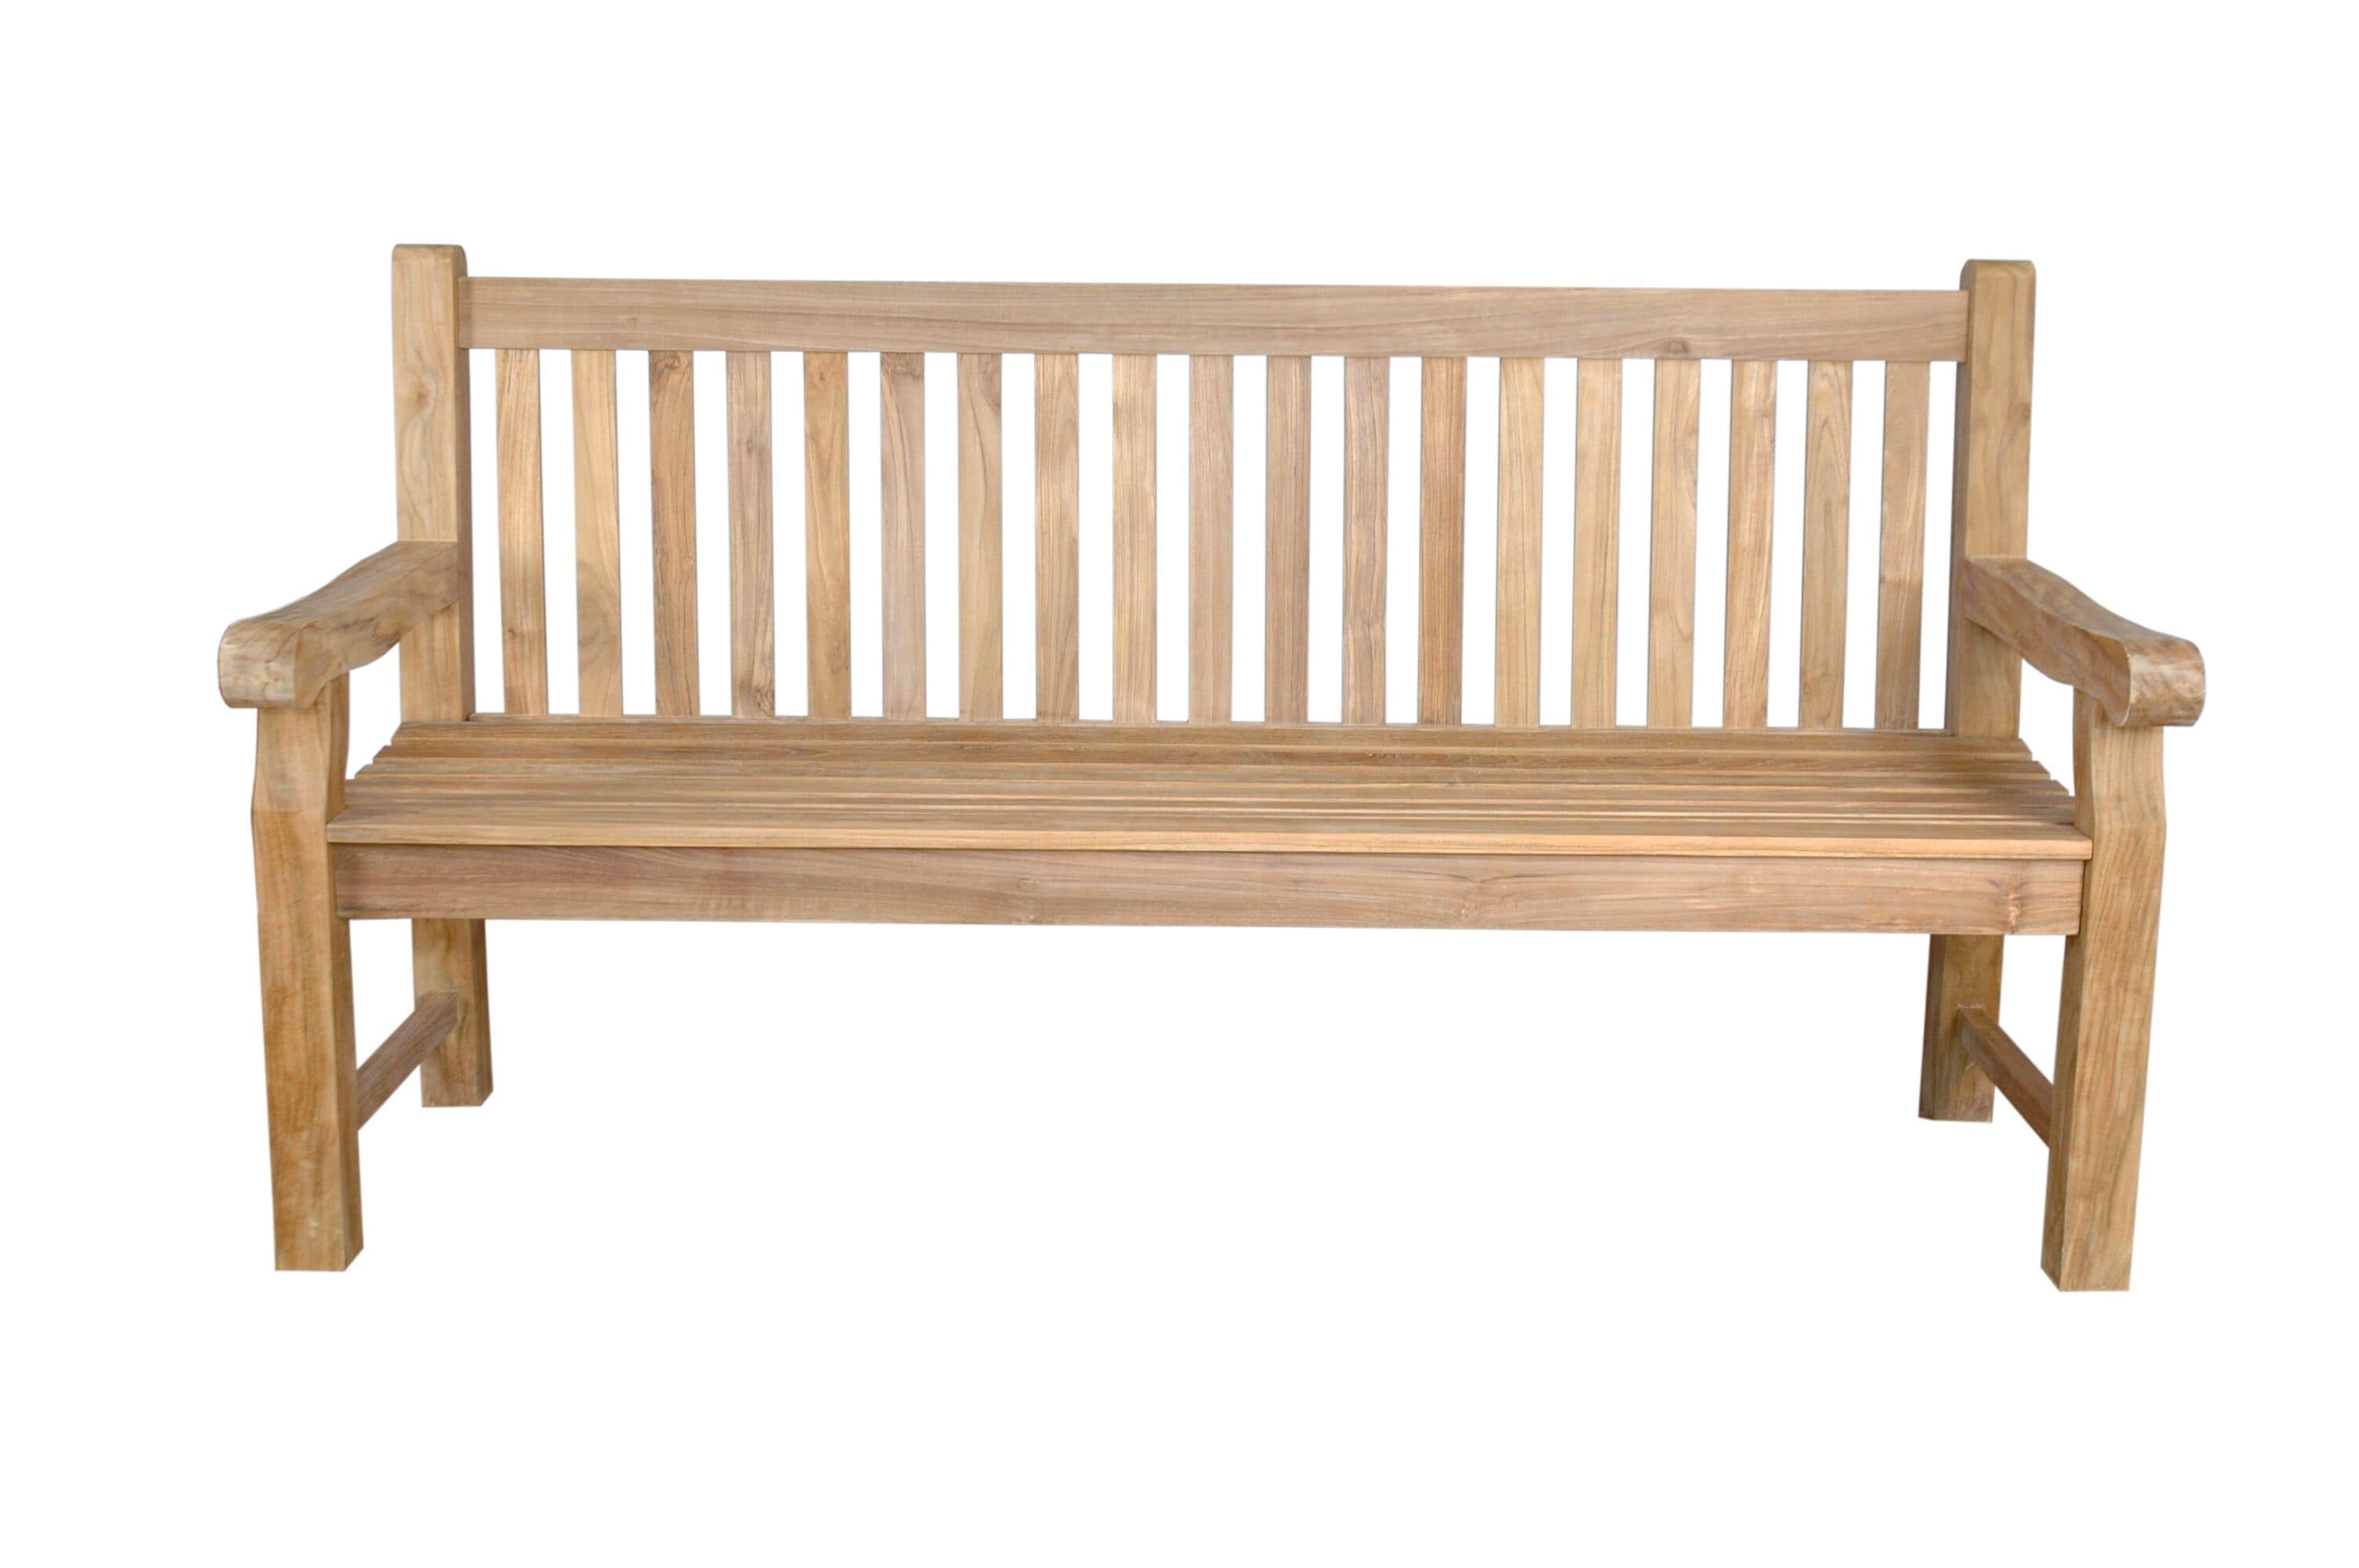 Anderson Teak Outdoor Bench Anderson Teak Devonshire 4-Seater Extra Thick Bench